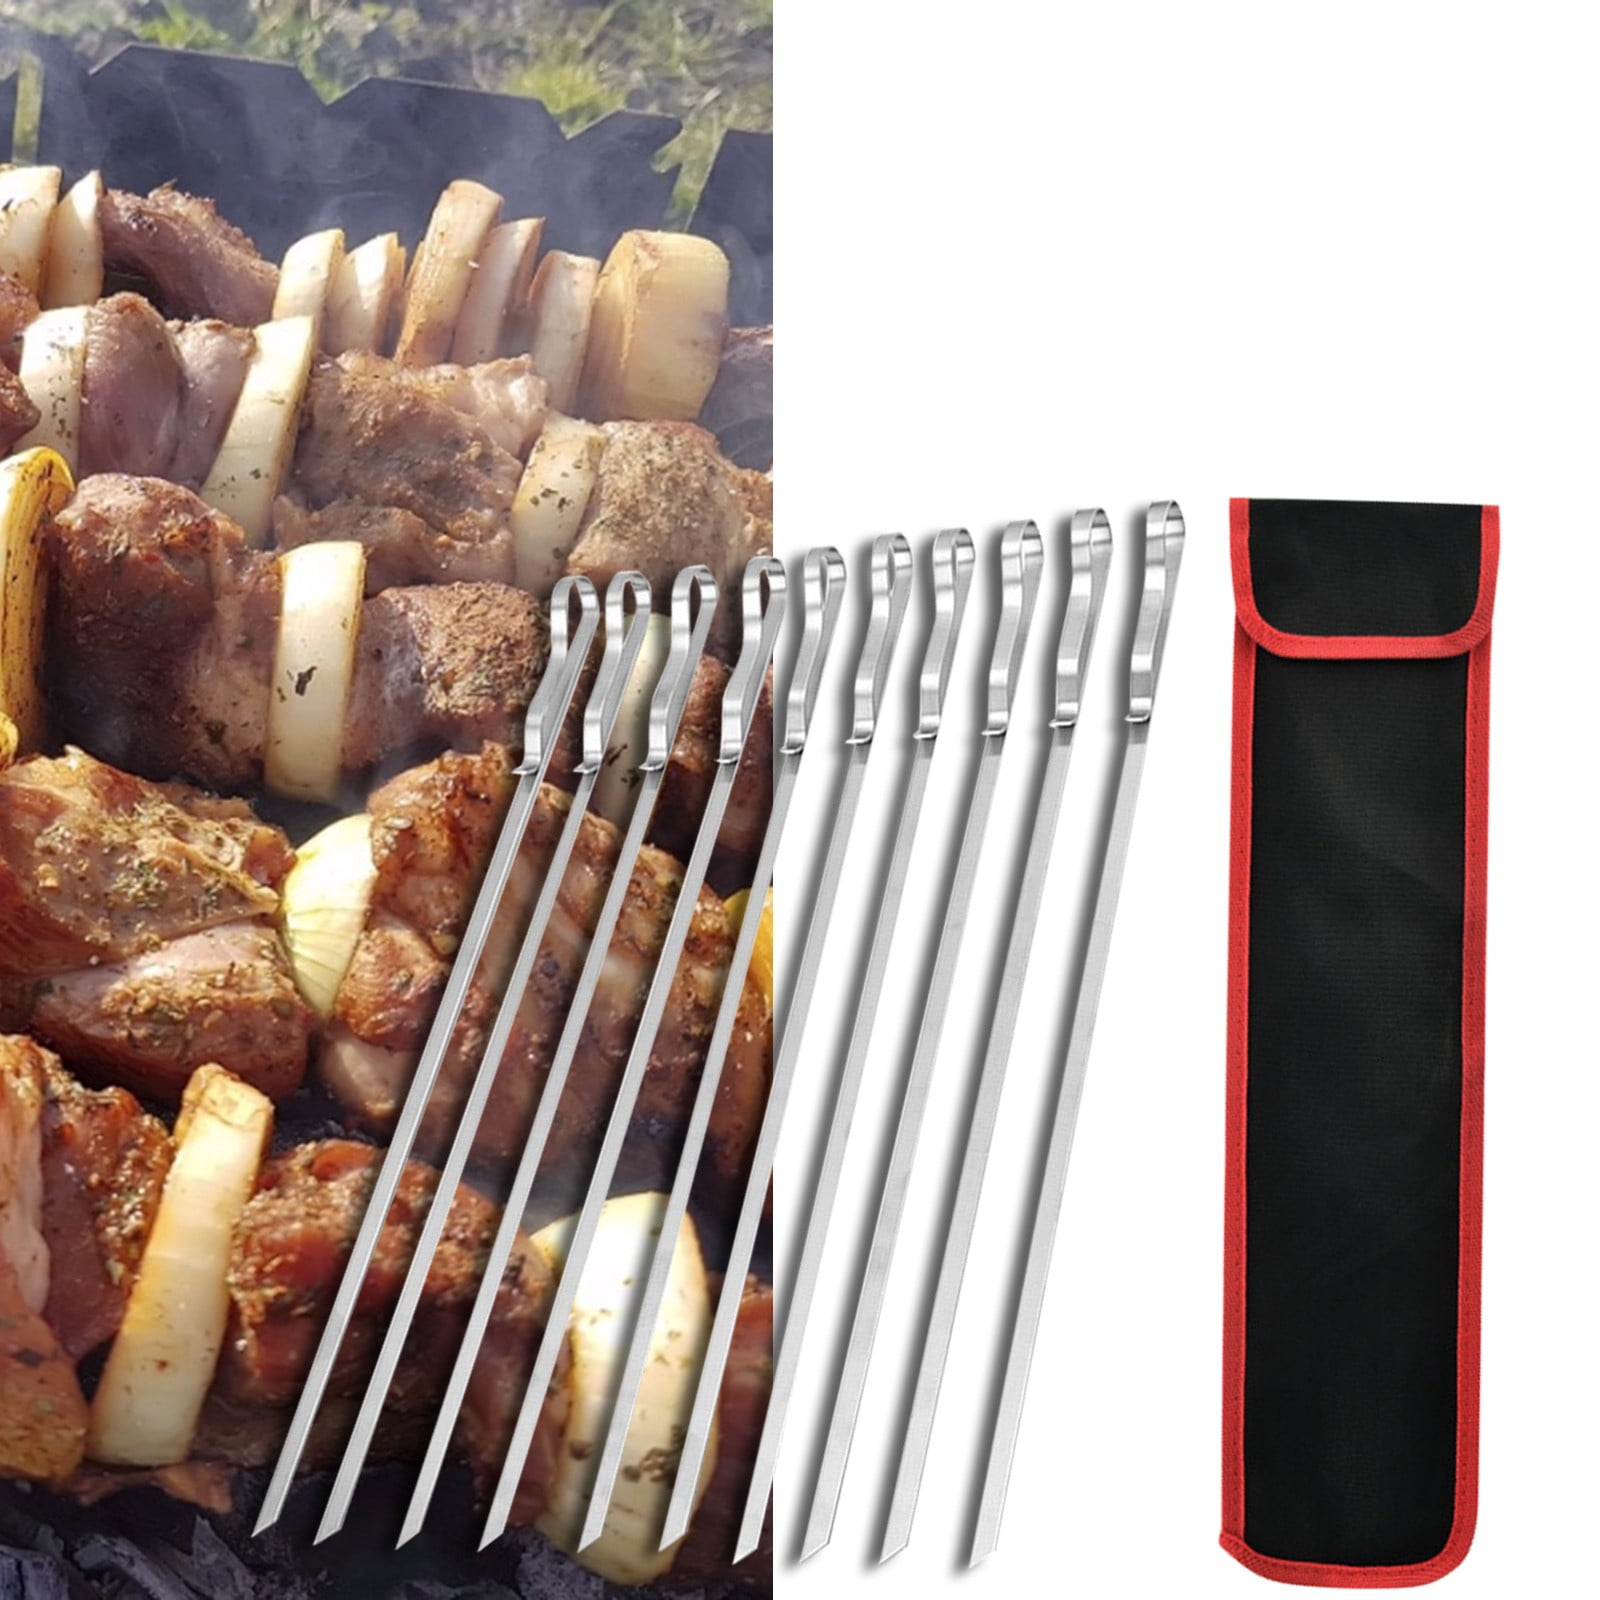 10X BBQ Barbeque Stainless Steel Shish Skewers Kebab Flat Long Grill Sticks 